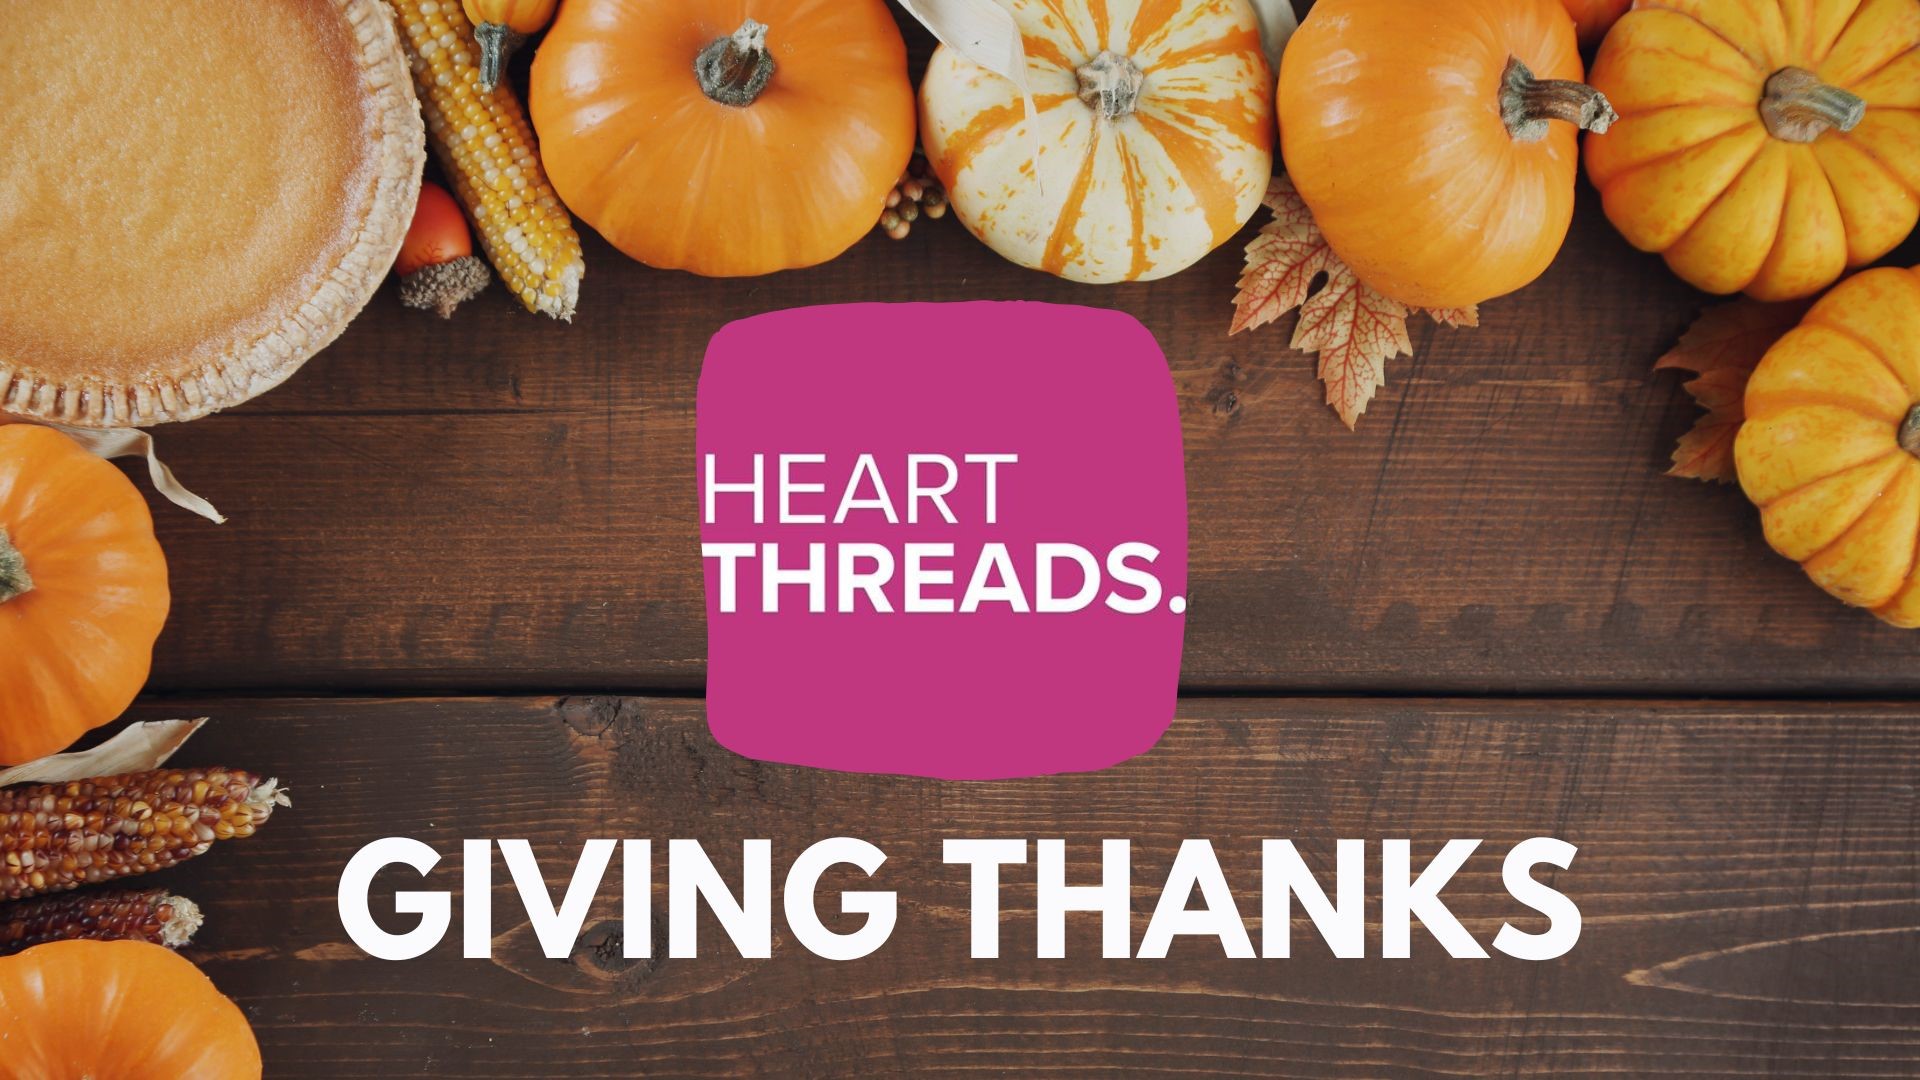 Heartwarming stories of people giving thanks and being grateful for family, second chances, healthcare and more.